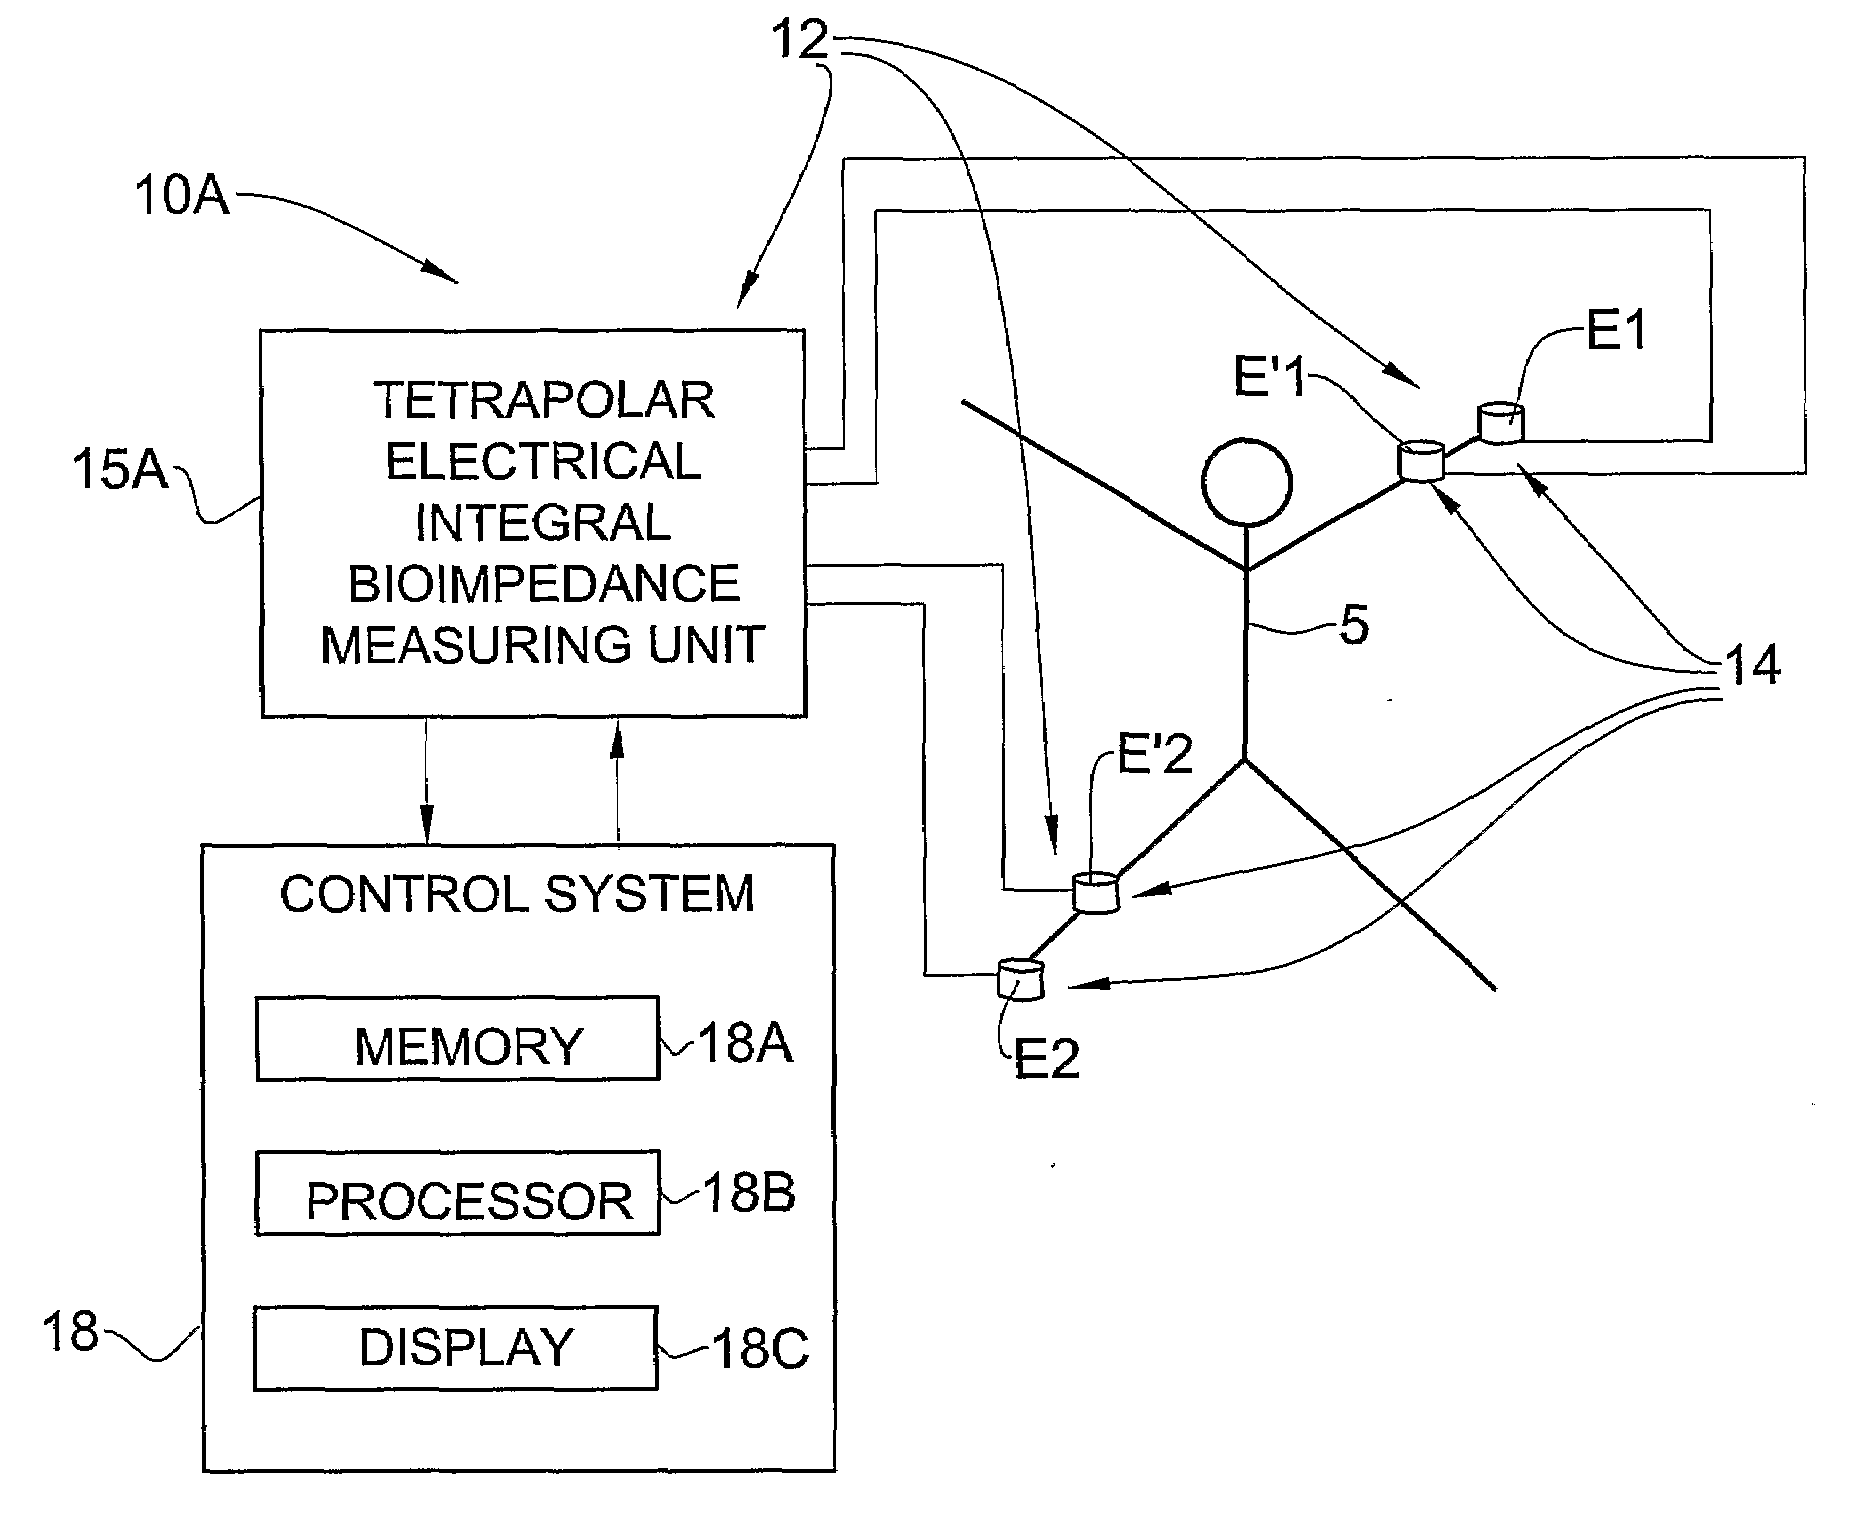 Method and System for Non-Invasive Measurement of Cardiac Parameters